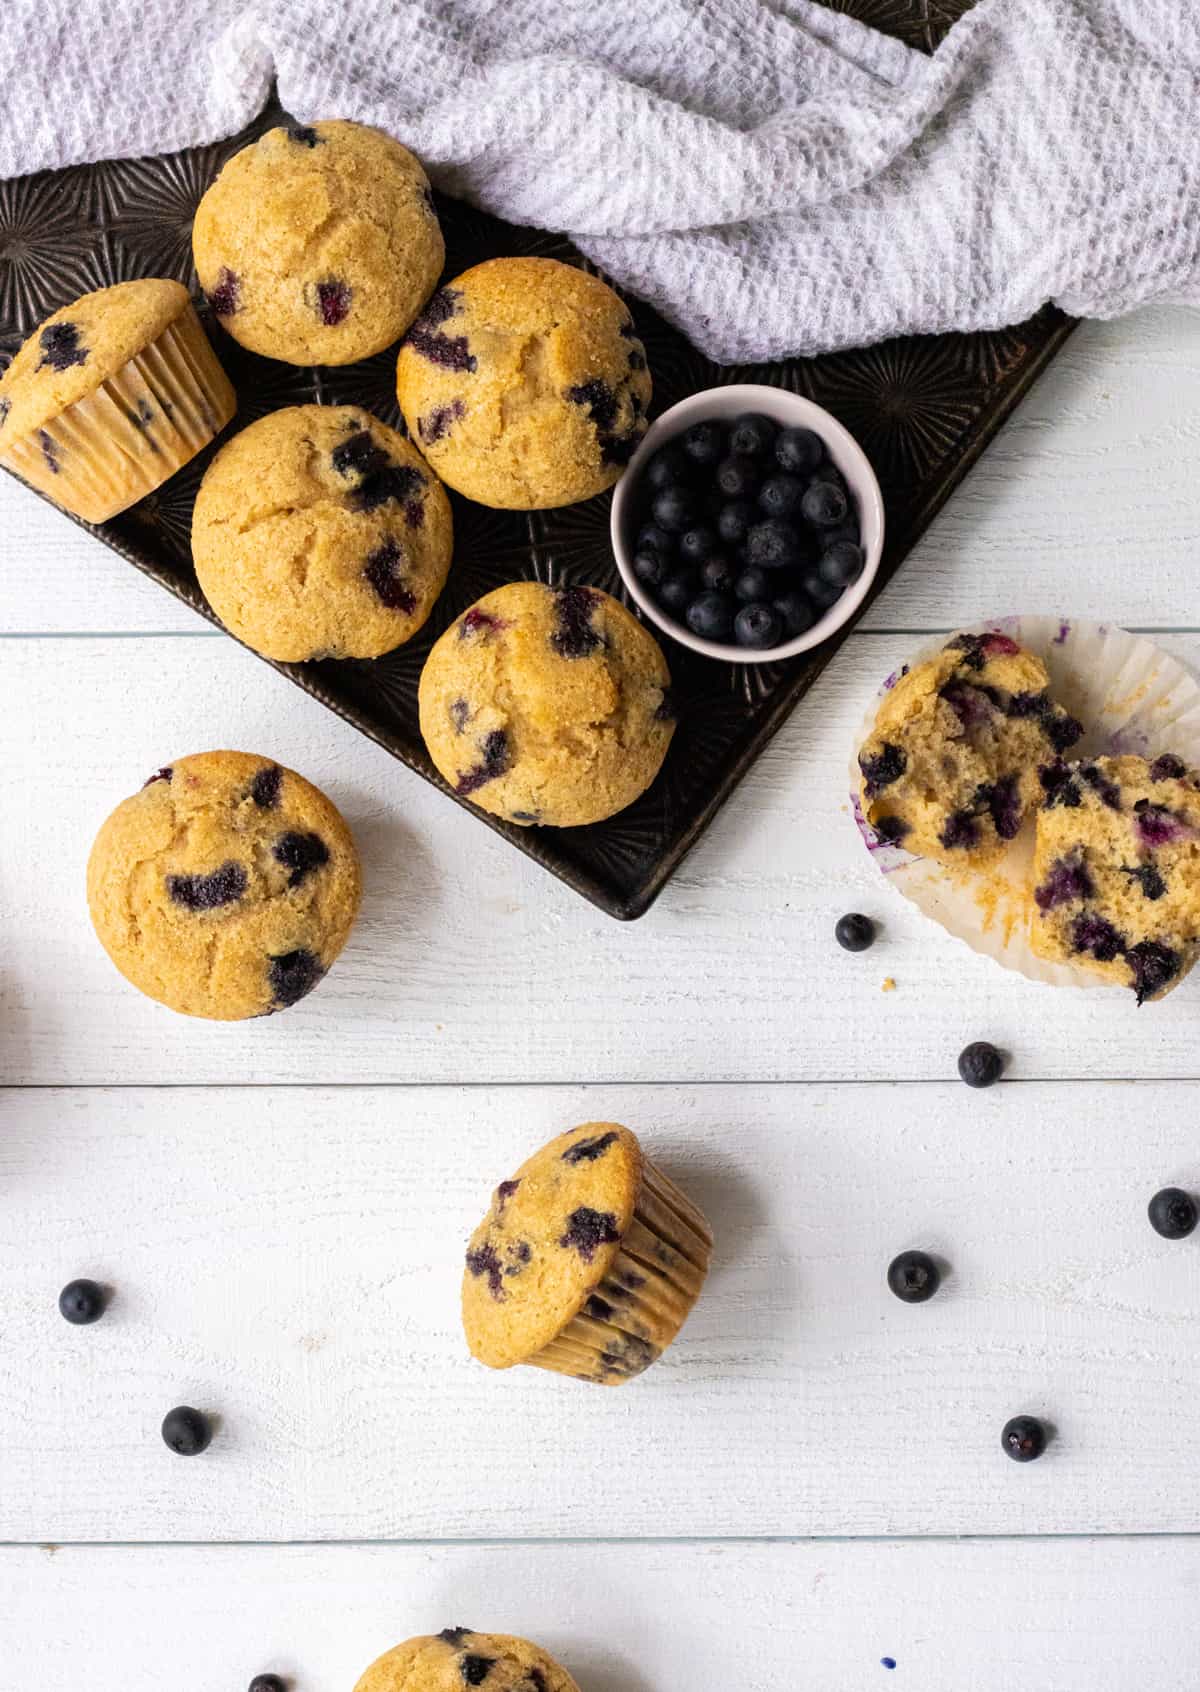 Blueberry buttermilk muffins on a cookie sheet with a bowl of blueberries and a tea towel and more muffins and blueberries on the table